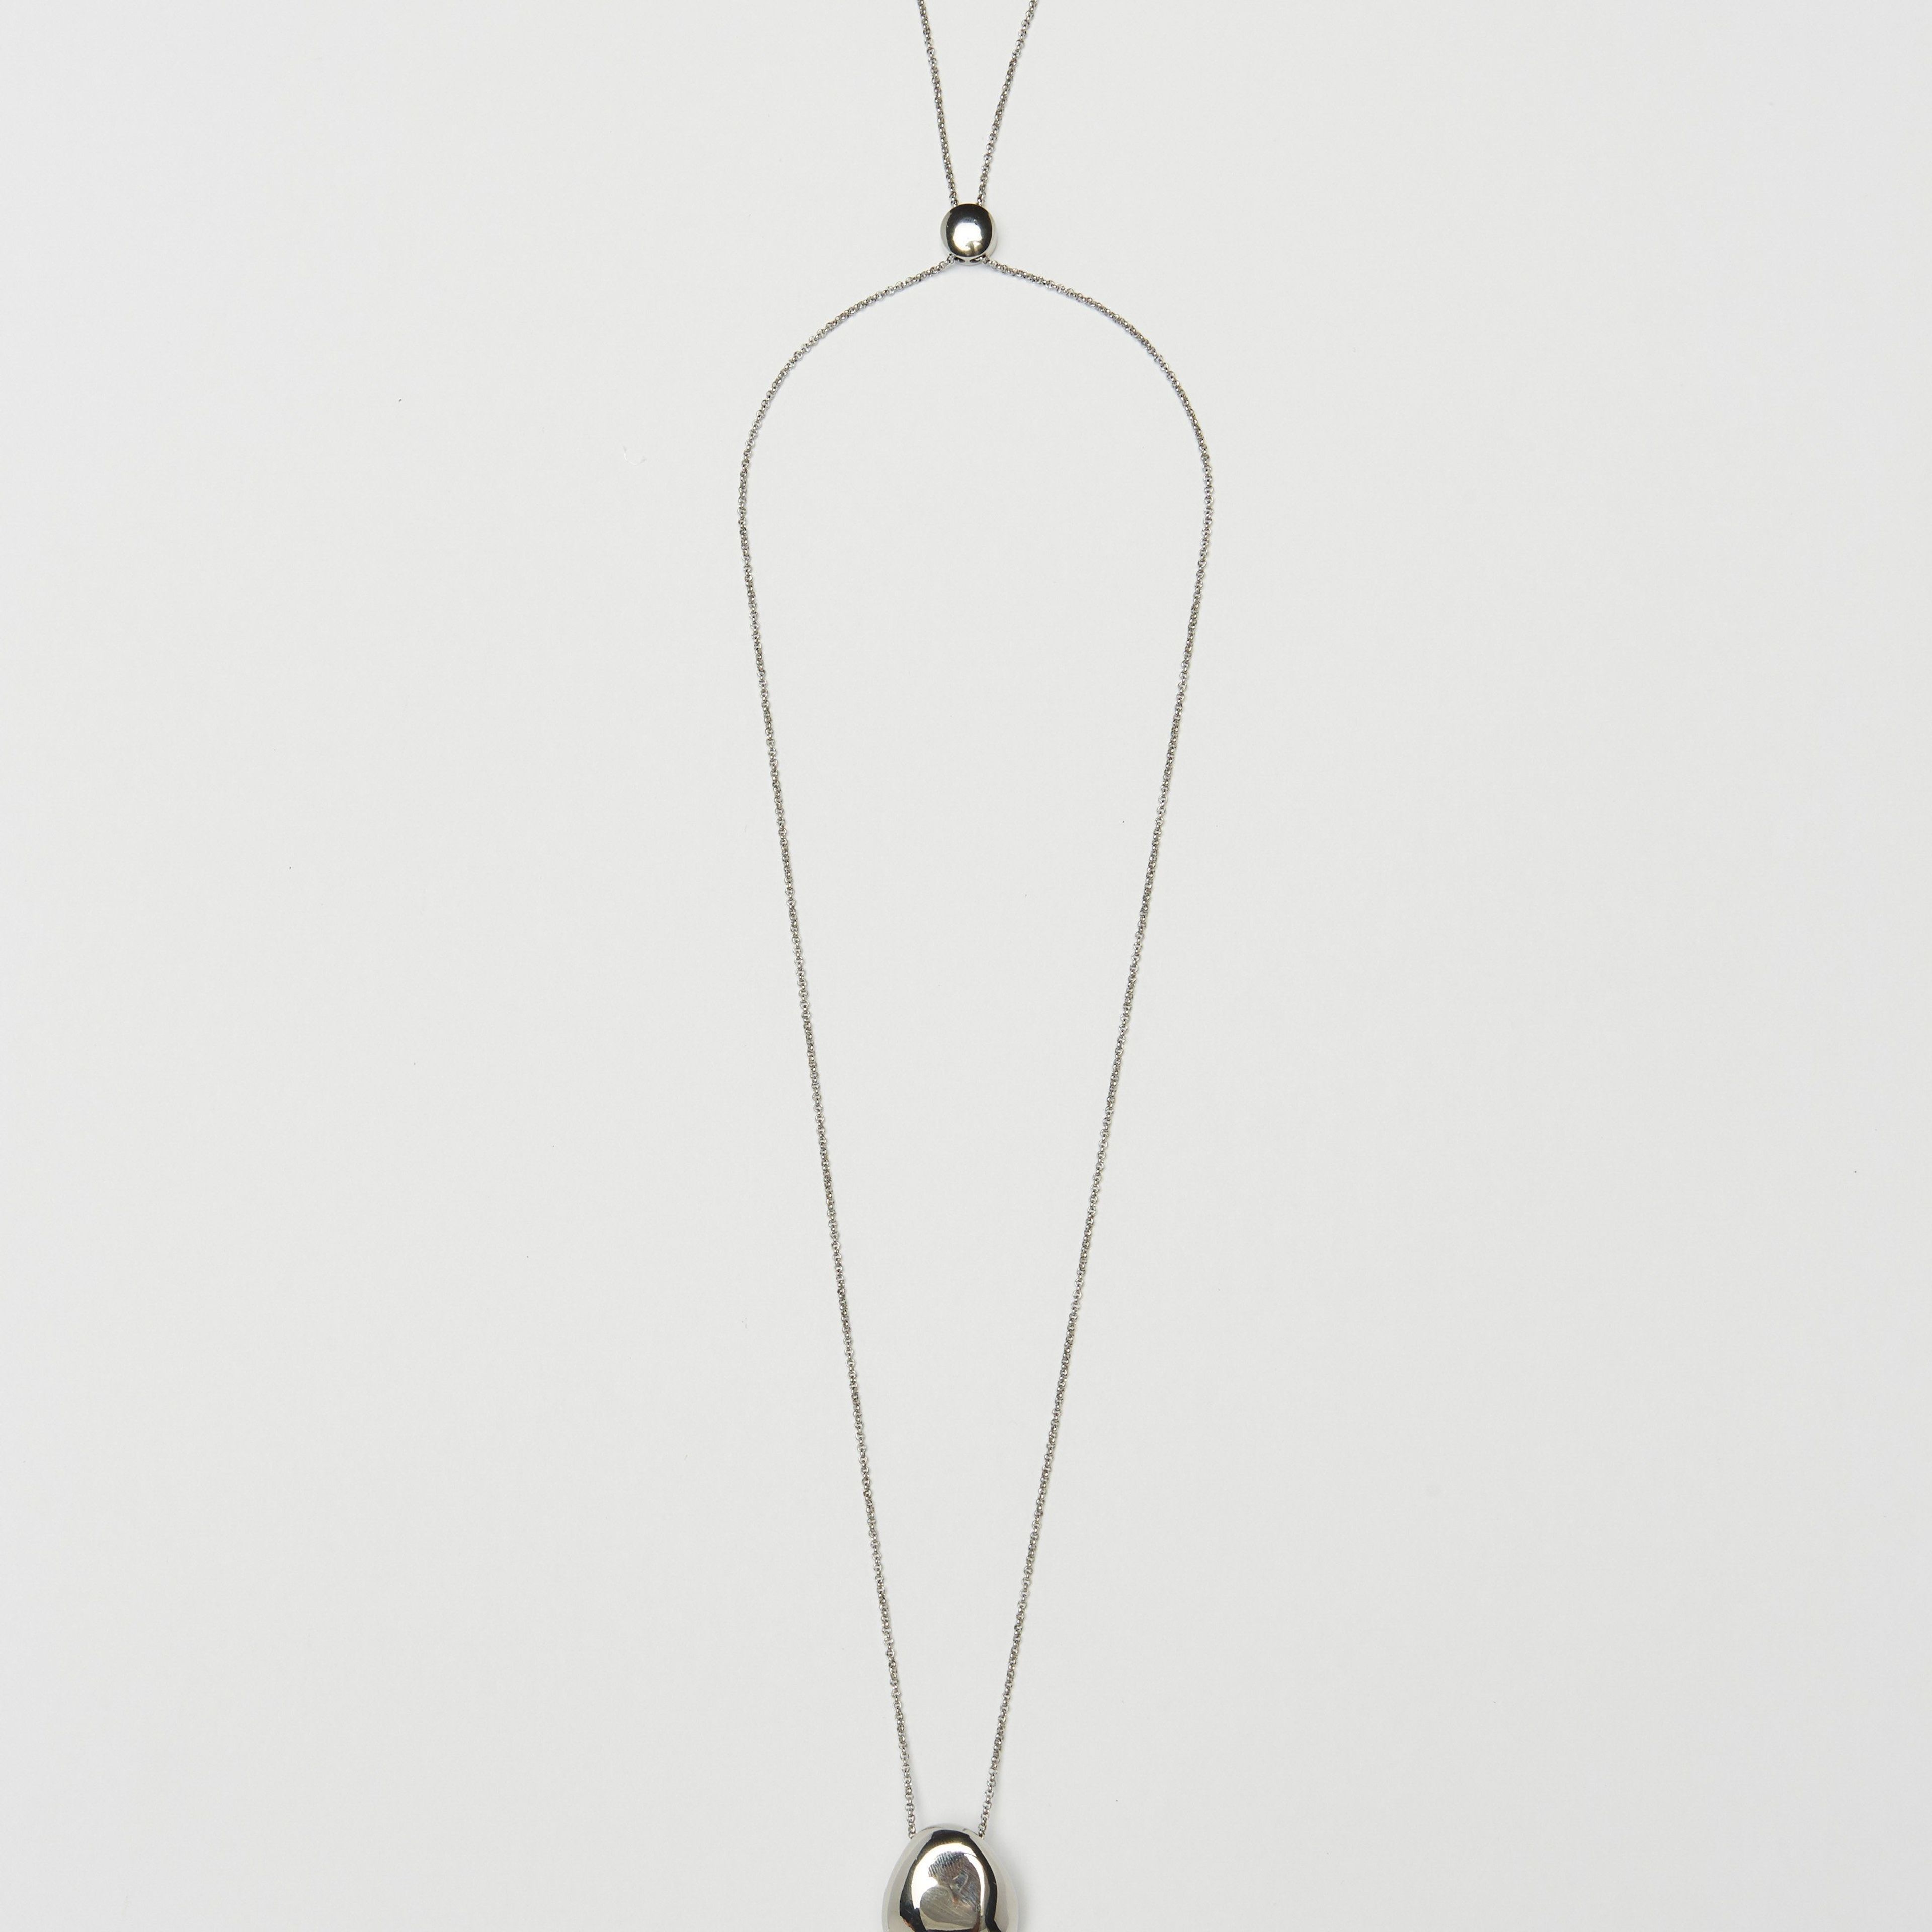 Silver Orb Necklace